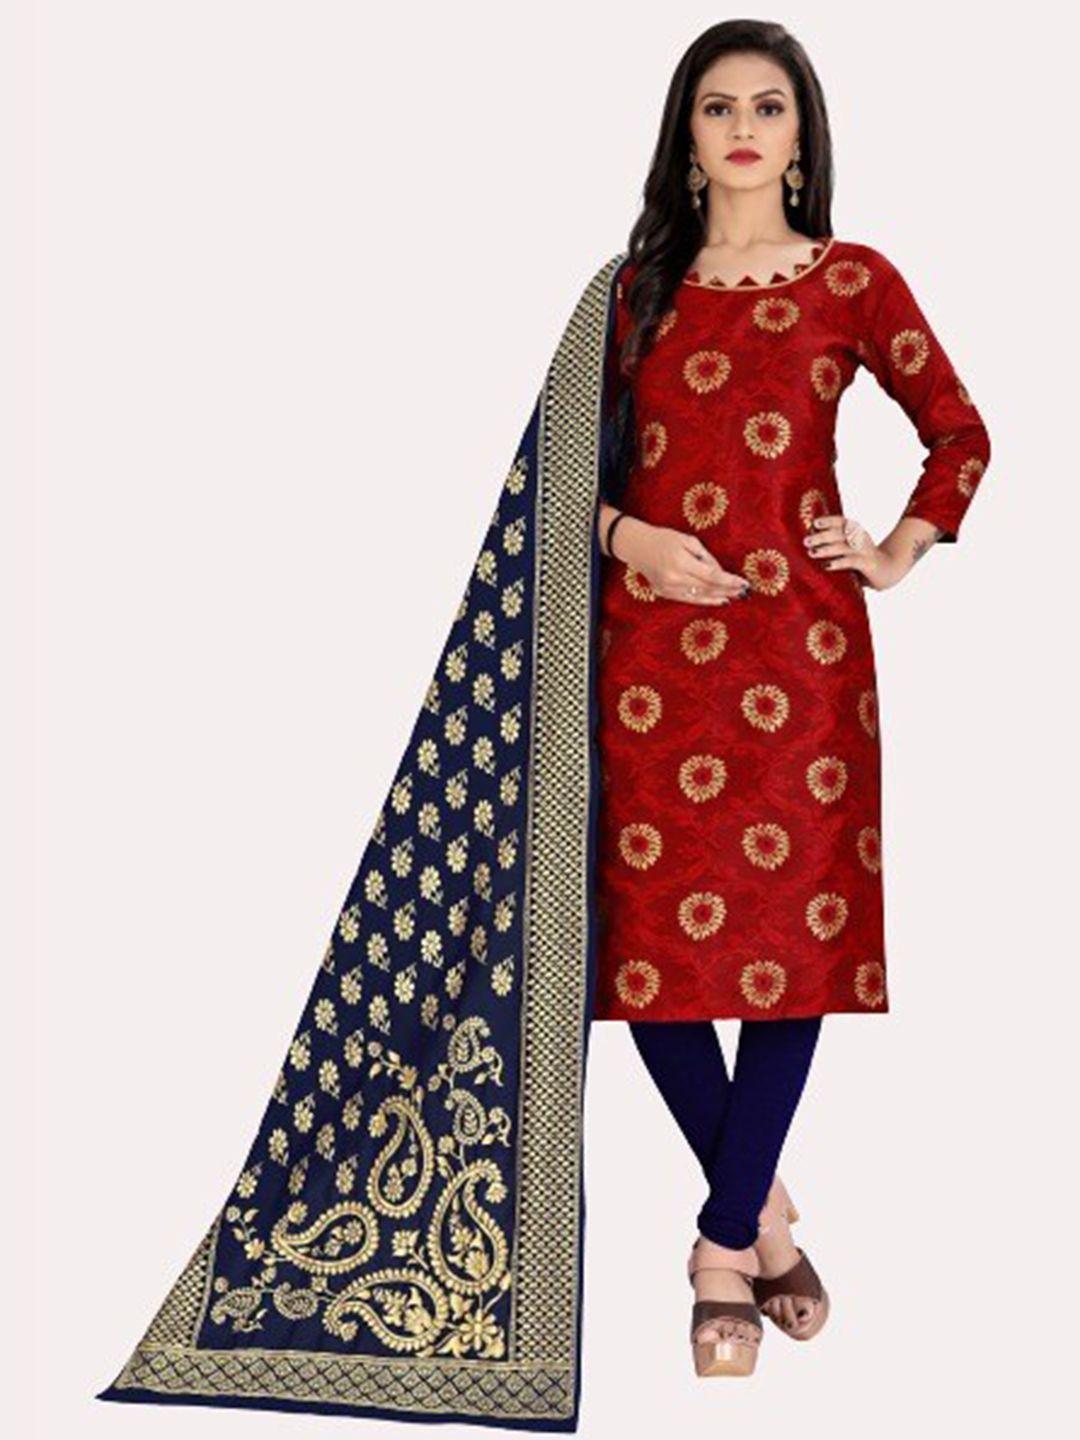 morly red & navy blue dupion silk unstitched dress material